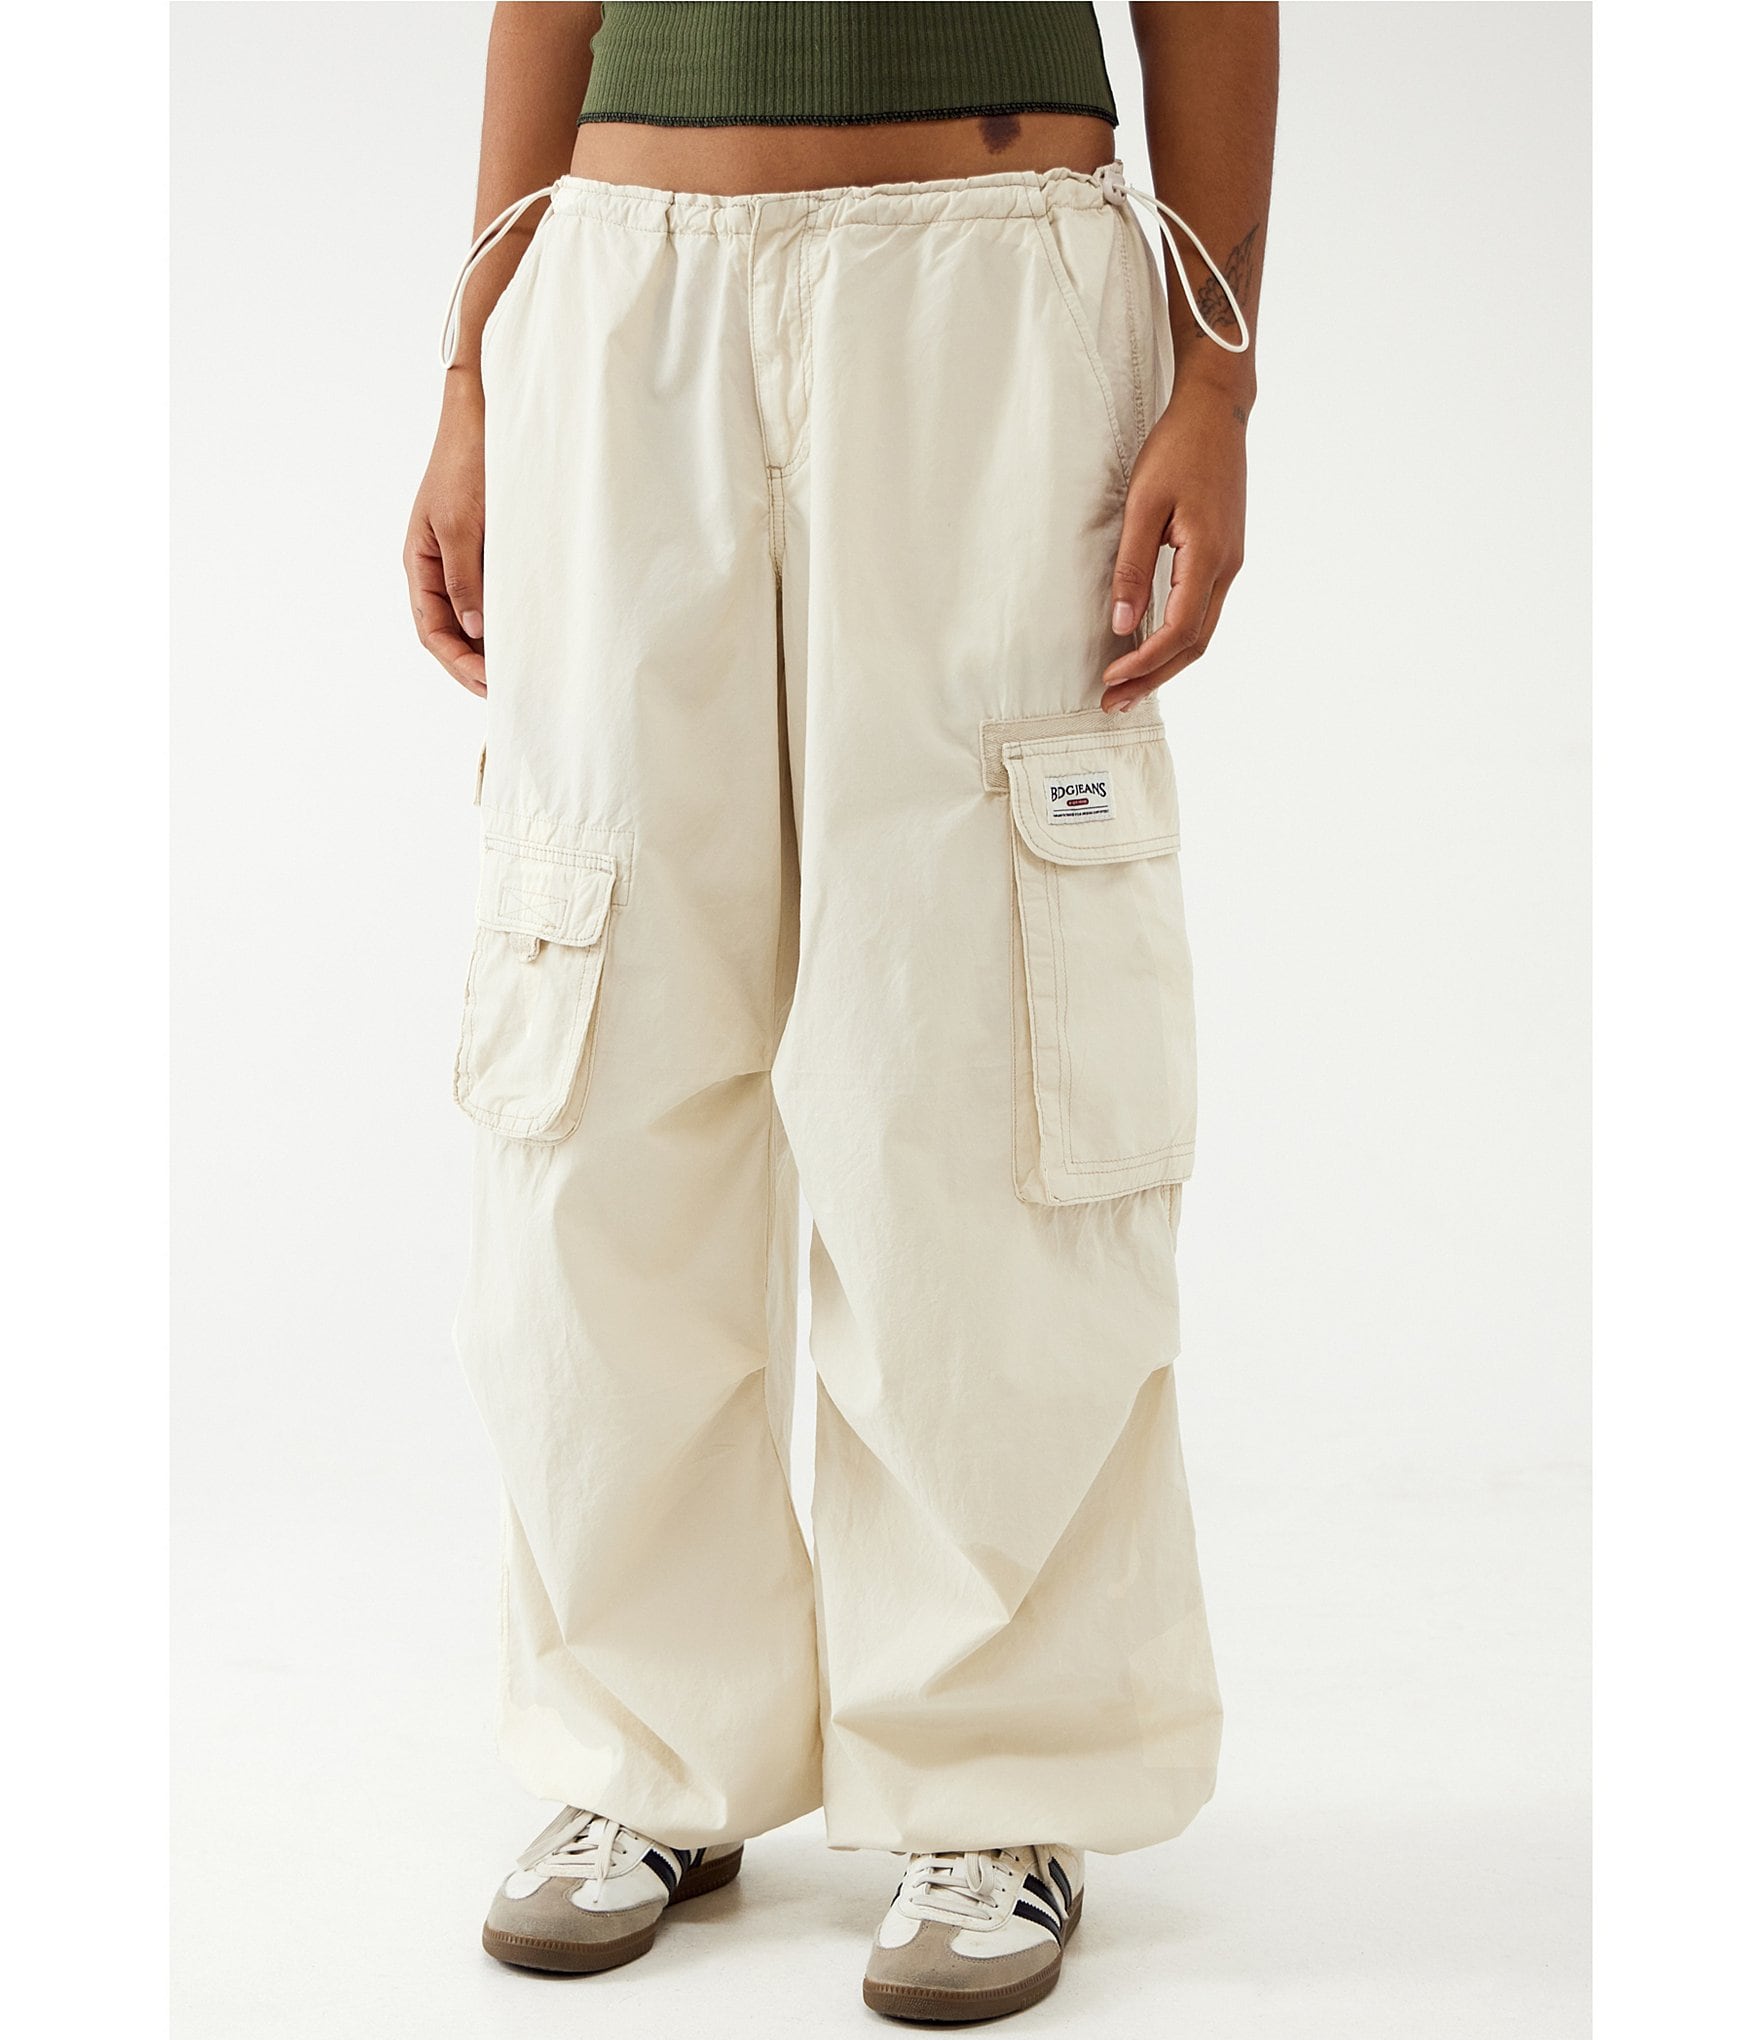 BDG Urban Outfitters 5 Pocket Womens Linen Pants